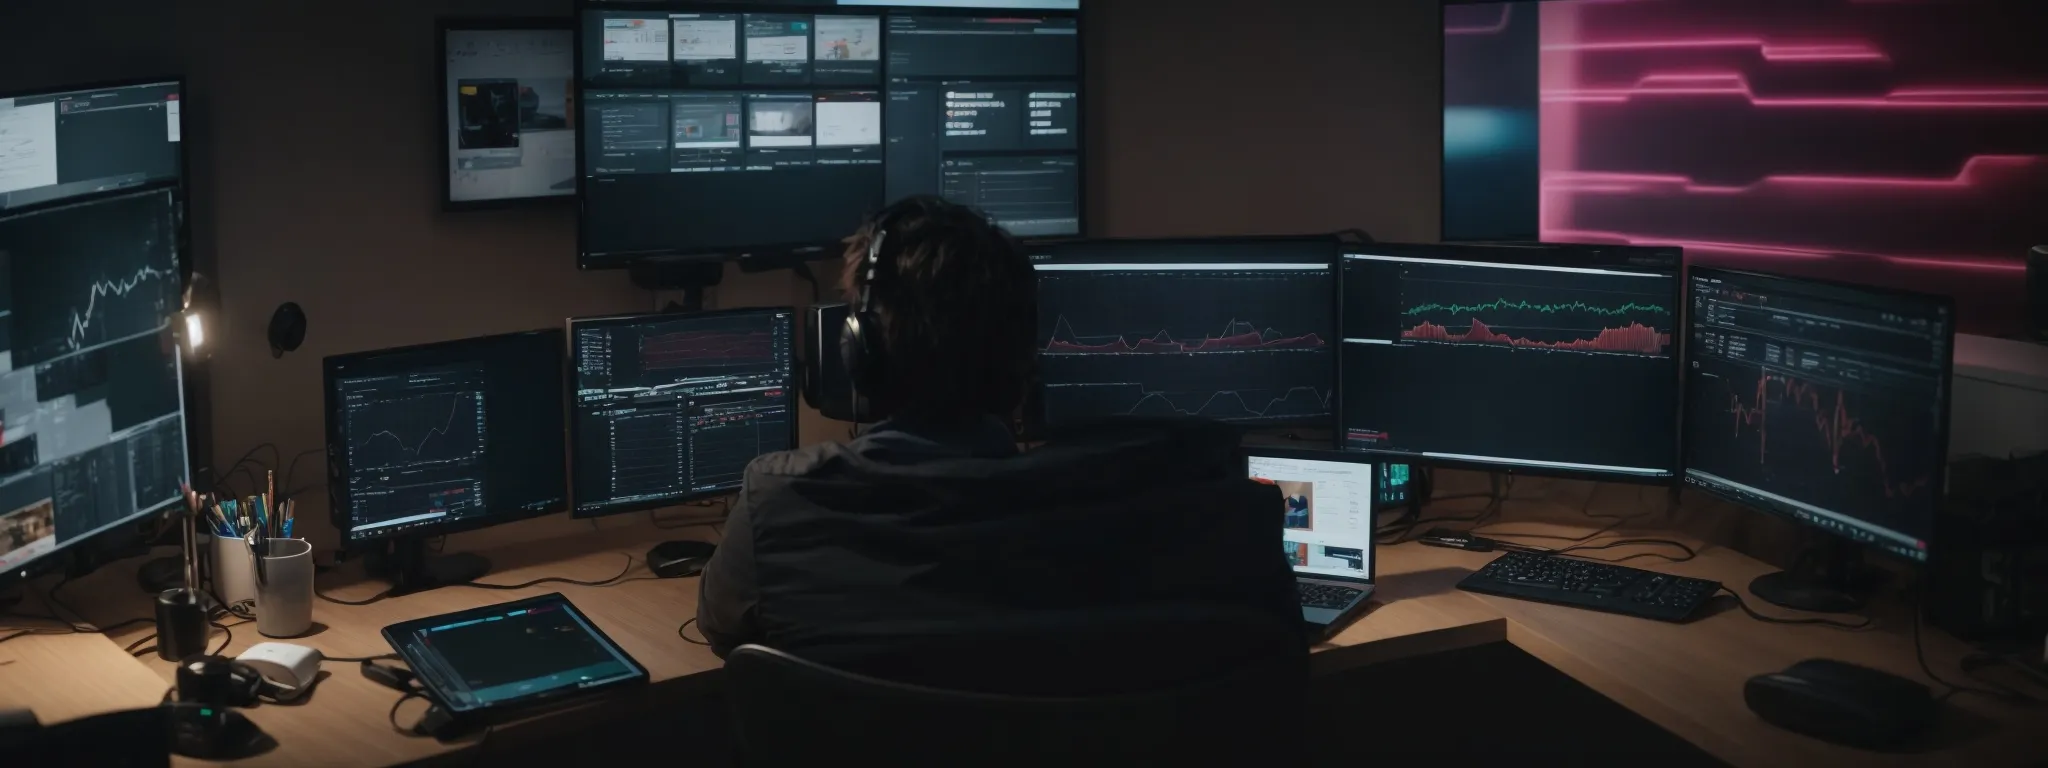 a content creator sits at a desk with two monitors displaying graphs and analytics while filming a tiktok video.